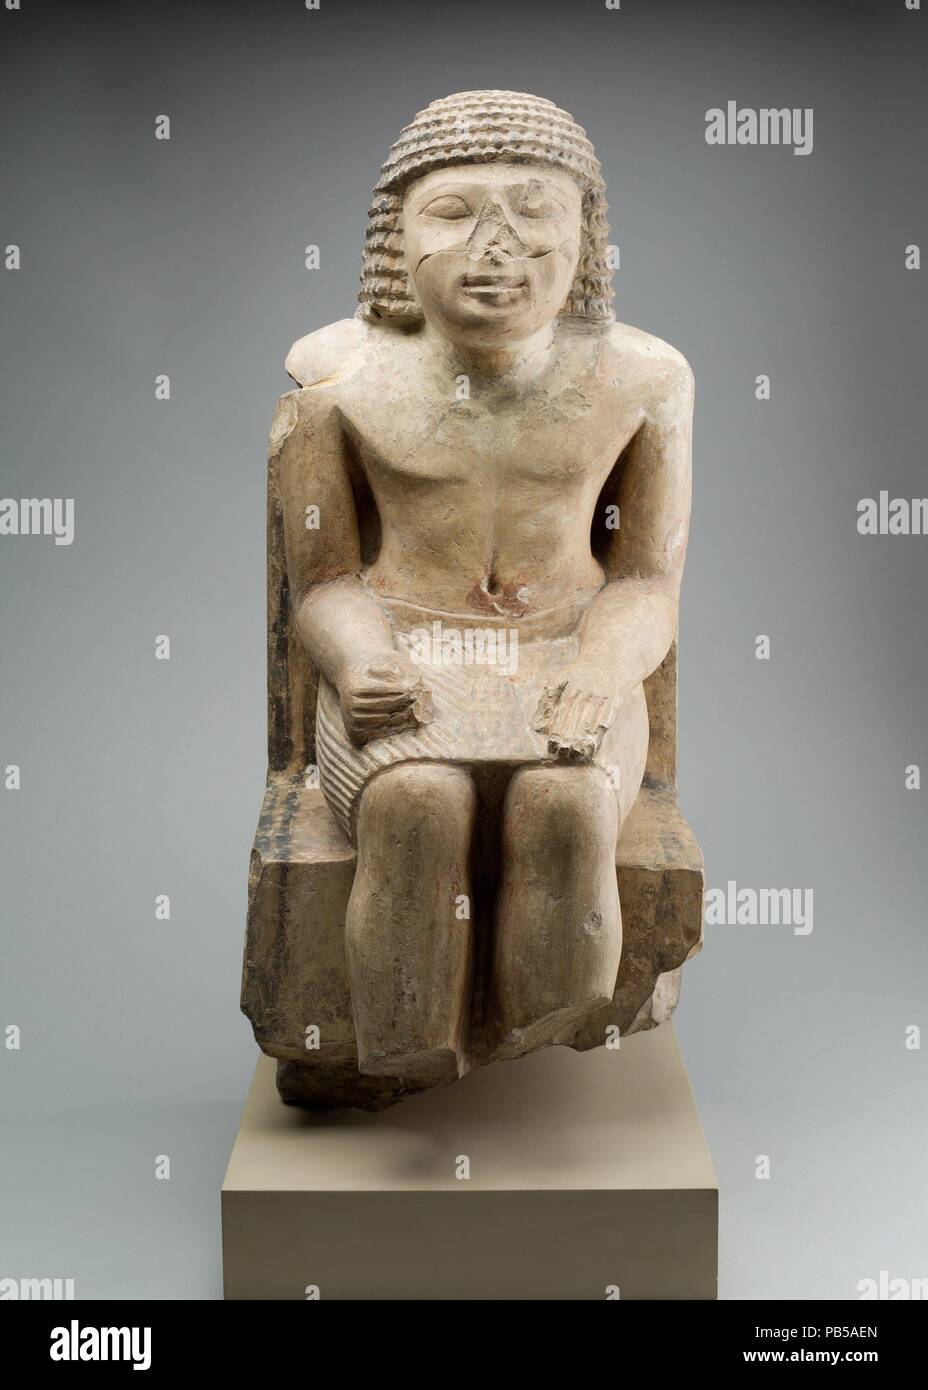 Seated Statue of the Nomarch Idu II of Dendera. Dimensions: H: 60.5 cm (23 13/16 in.). Dynasty: Dynasty 6. Reign: Reign of Pepi II. Date: ca. 2246-2152 B.C..  Discovered in his mastaba tomb at Dendera, this statue represents the nomarch (governor) of a province of Upper Egypt during the late Old Kingdom. This man, Idu II, wielded considerable power during the long reign of Pepi II, the last king of Dynasty 6. Created by a provincial artist, the figure has very large eyes and somehwat unconvential proportions, and is seated on a high-backed chair instead of the more common block seat. He wears  Stock Photo